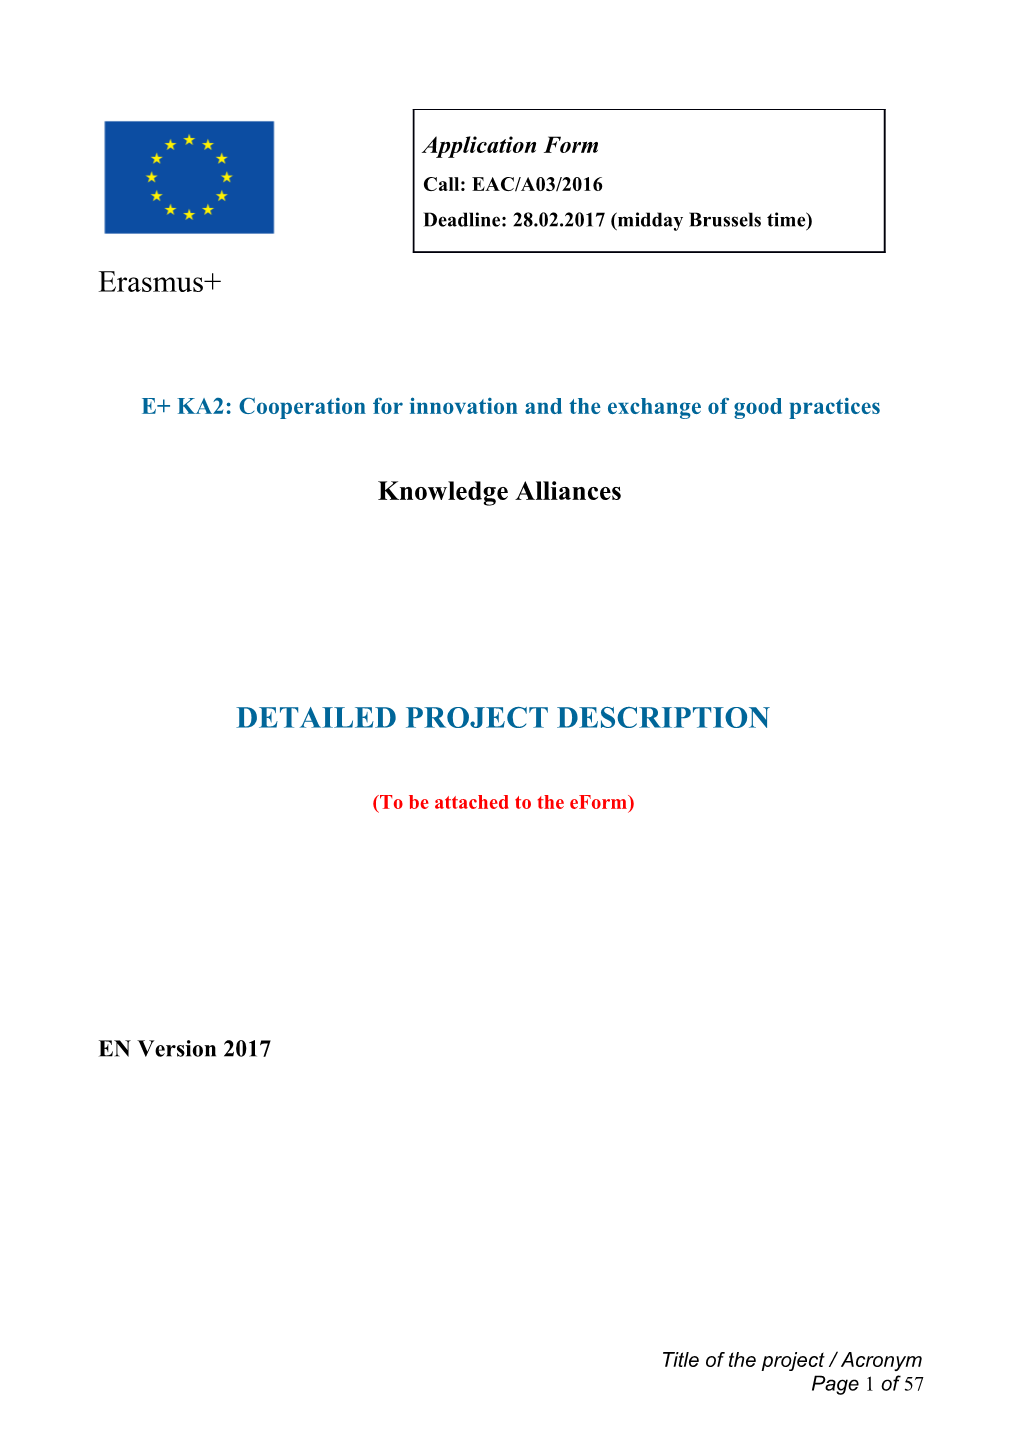 E+ KA2: Cooperation for Innovation and the Exchange of Good Practices